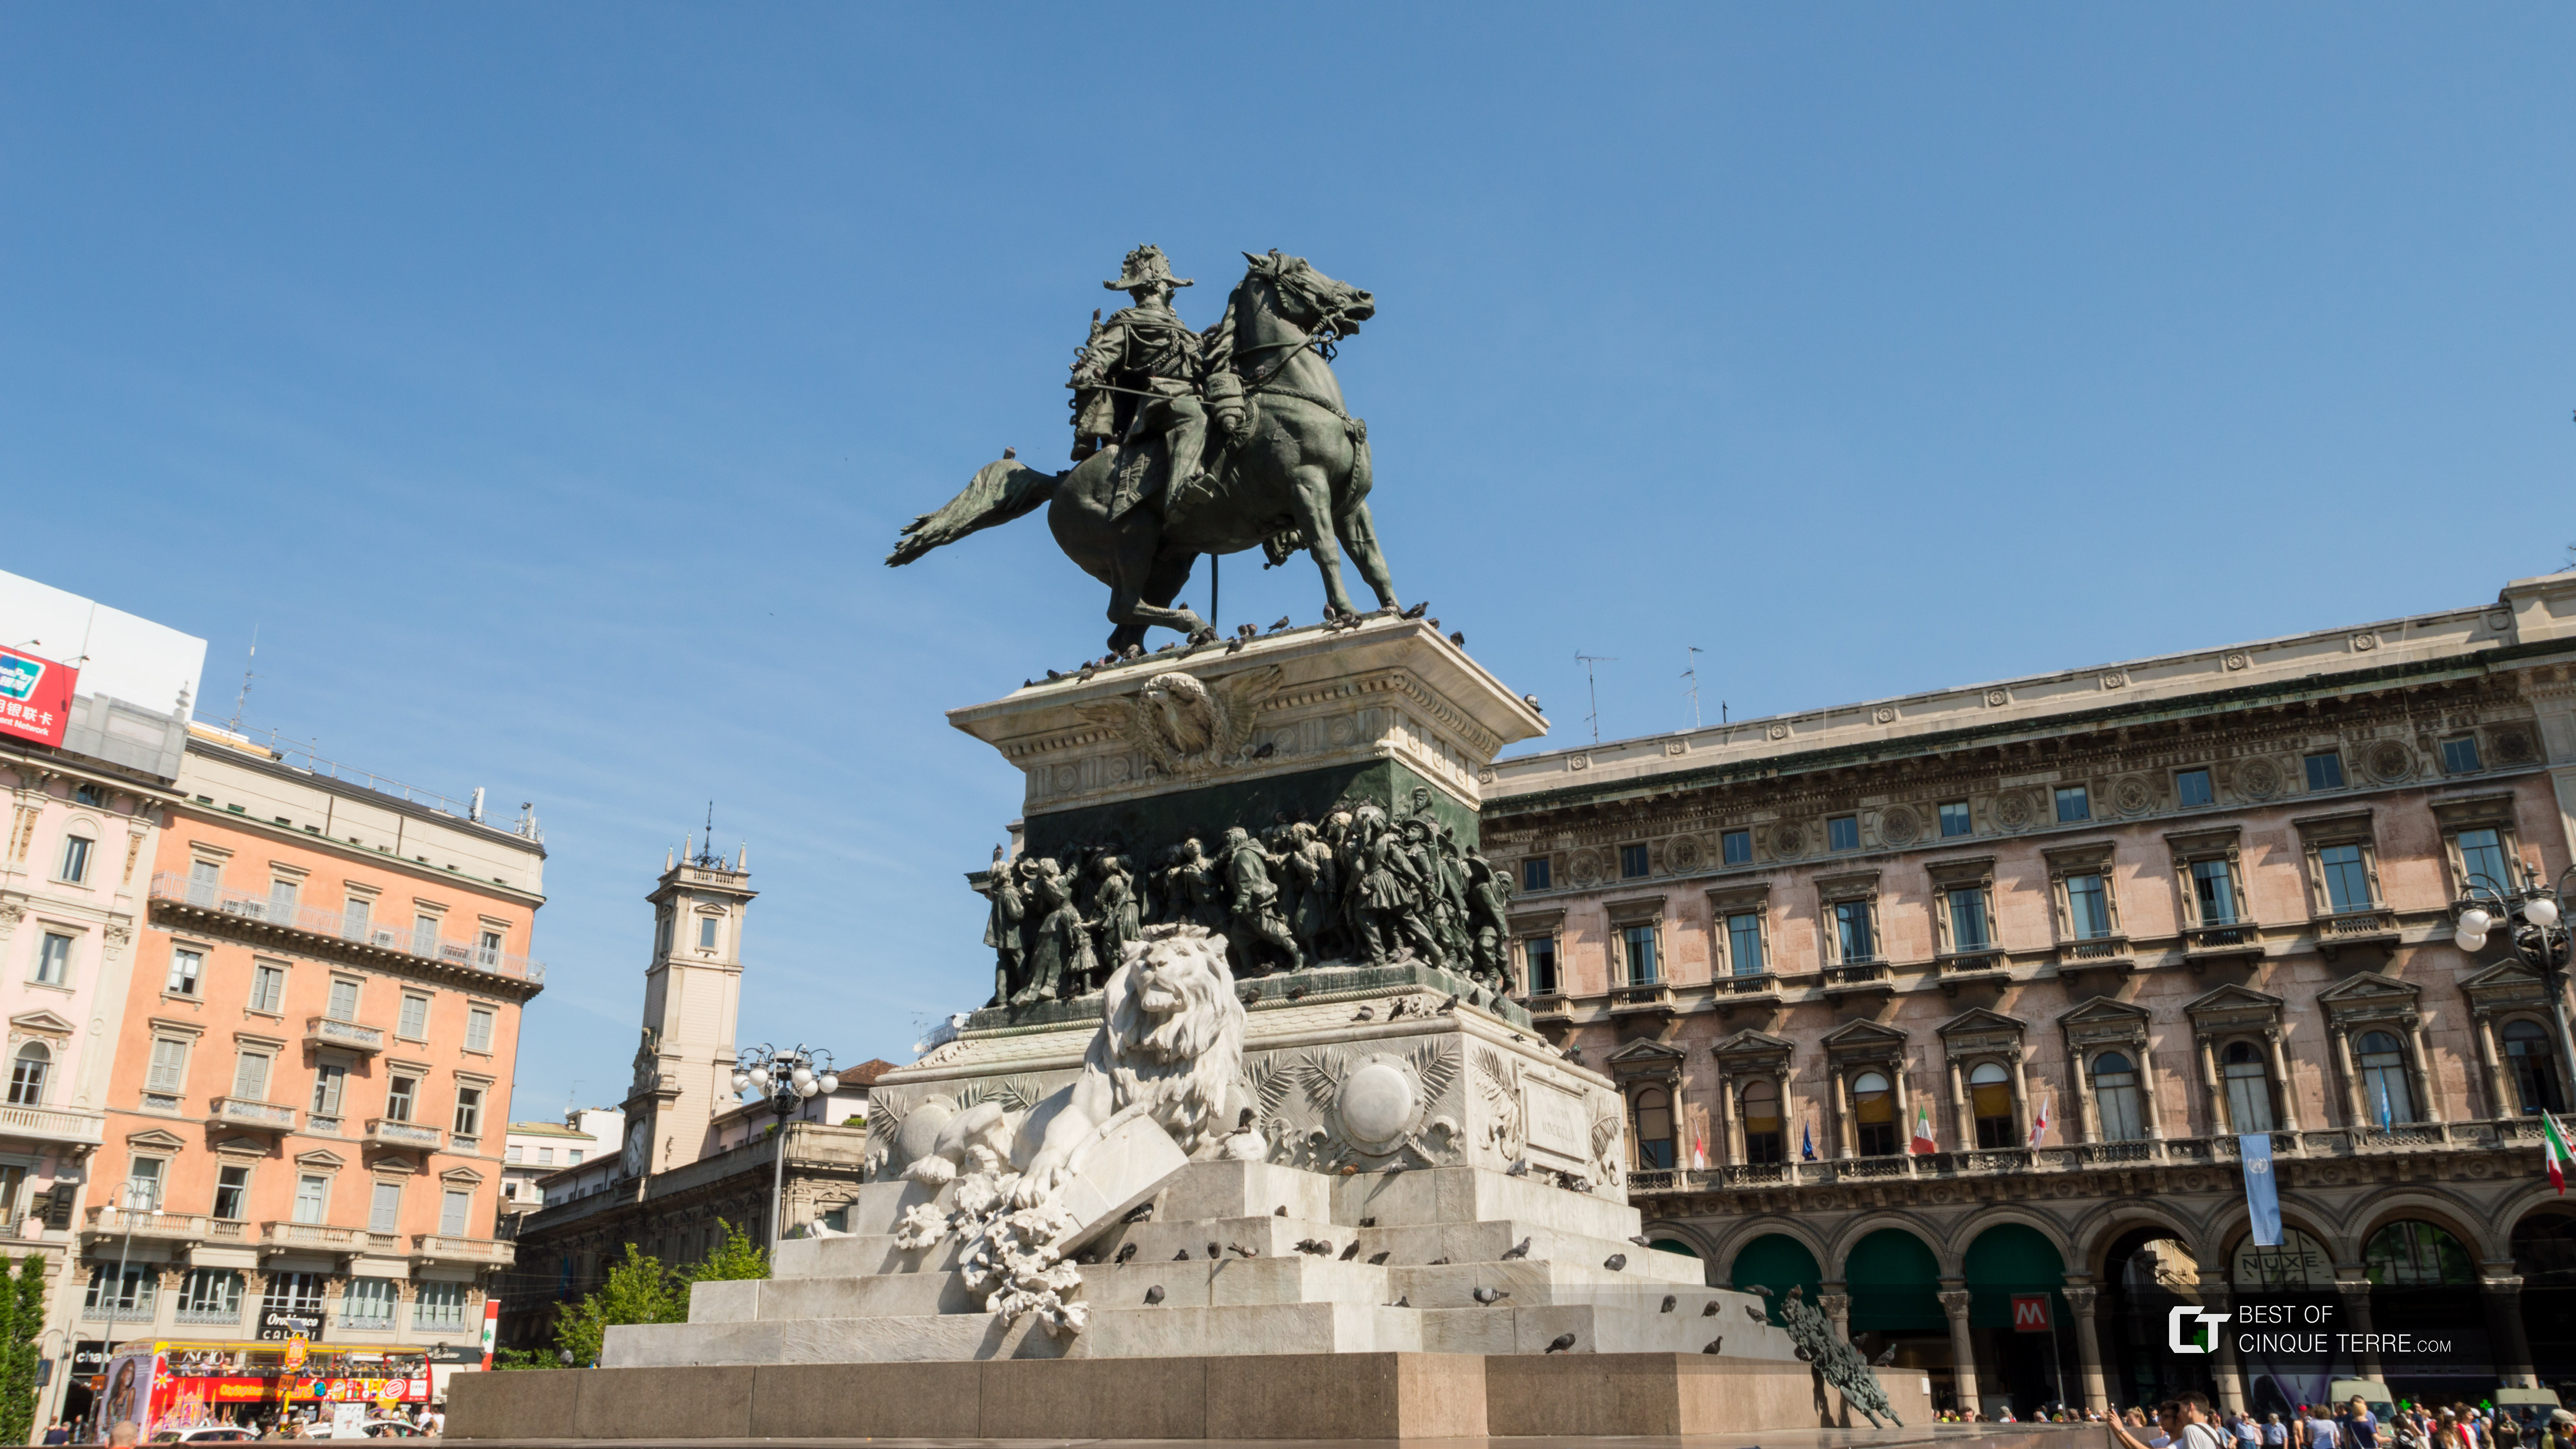 The statue of King Victor Emmanuel II, Milan, Italy